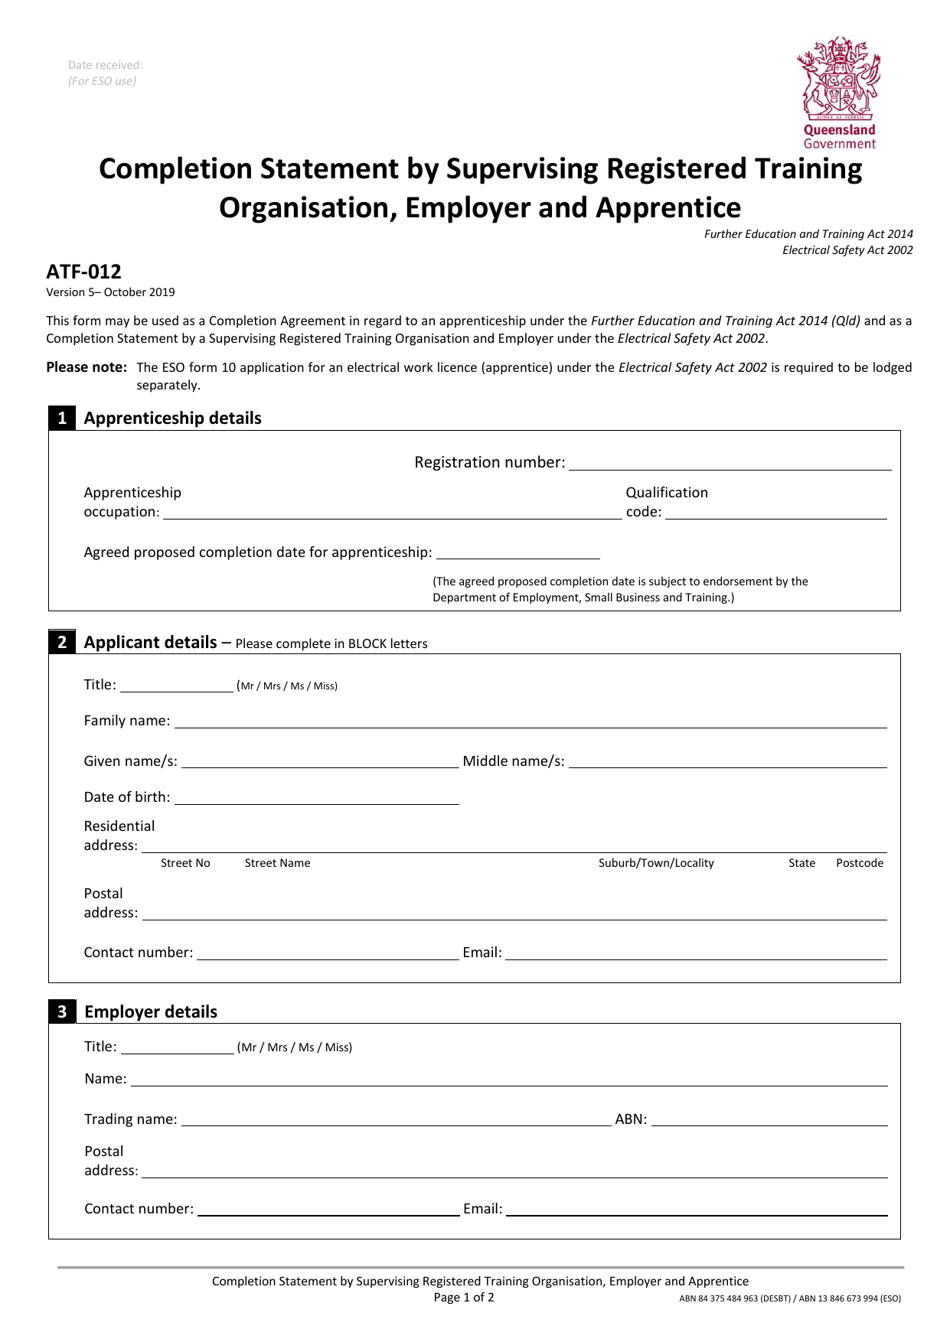 Form ATF-012 Completion Statement by Supervising Registered Training Organisation, Employer and Apprentice - Queensland, Australia, Page 1